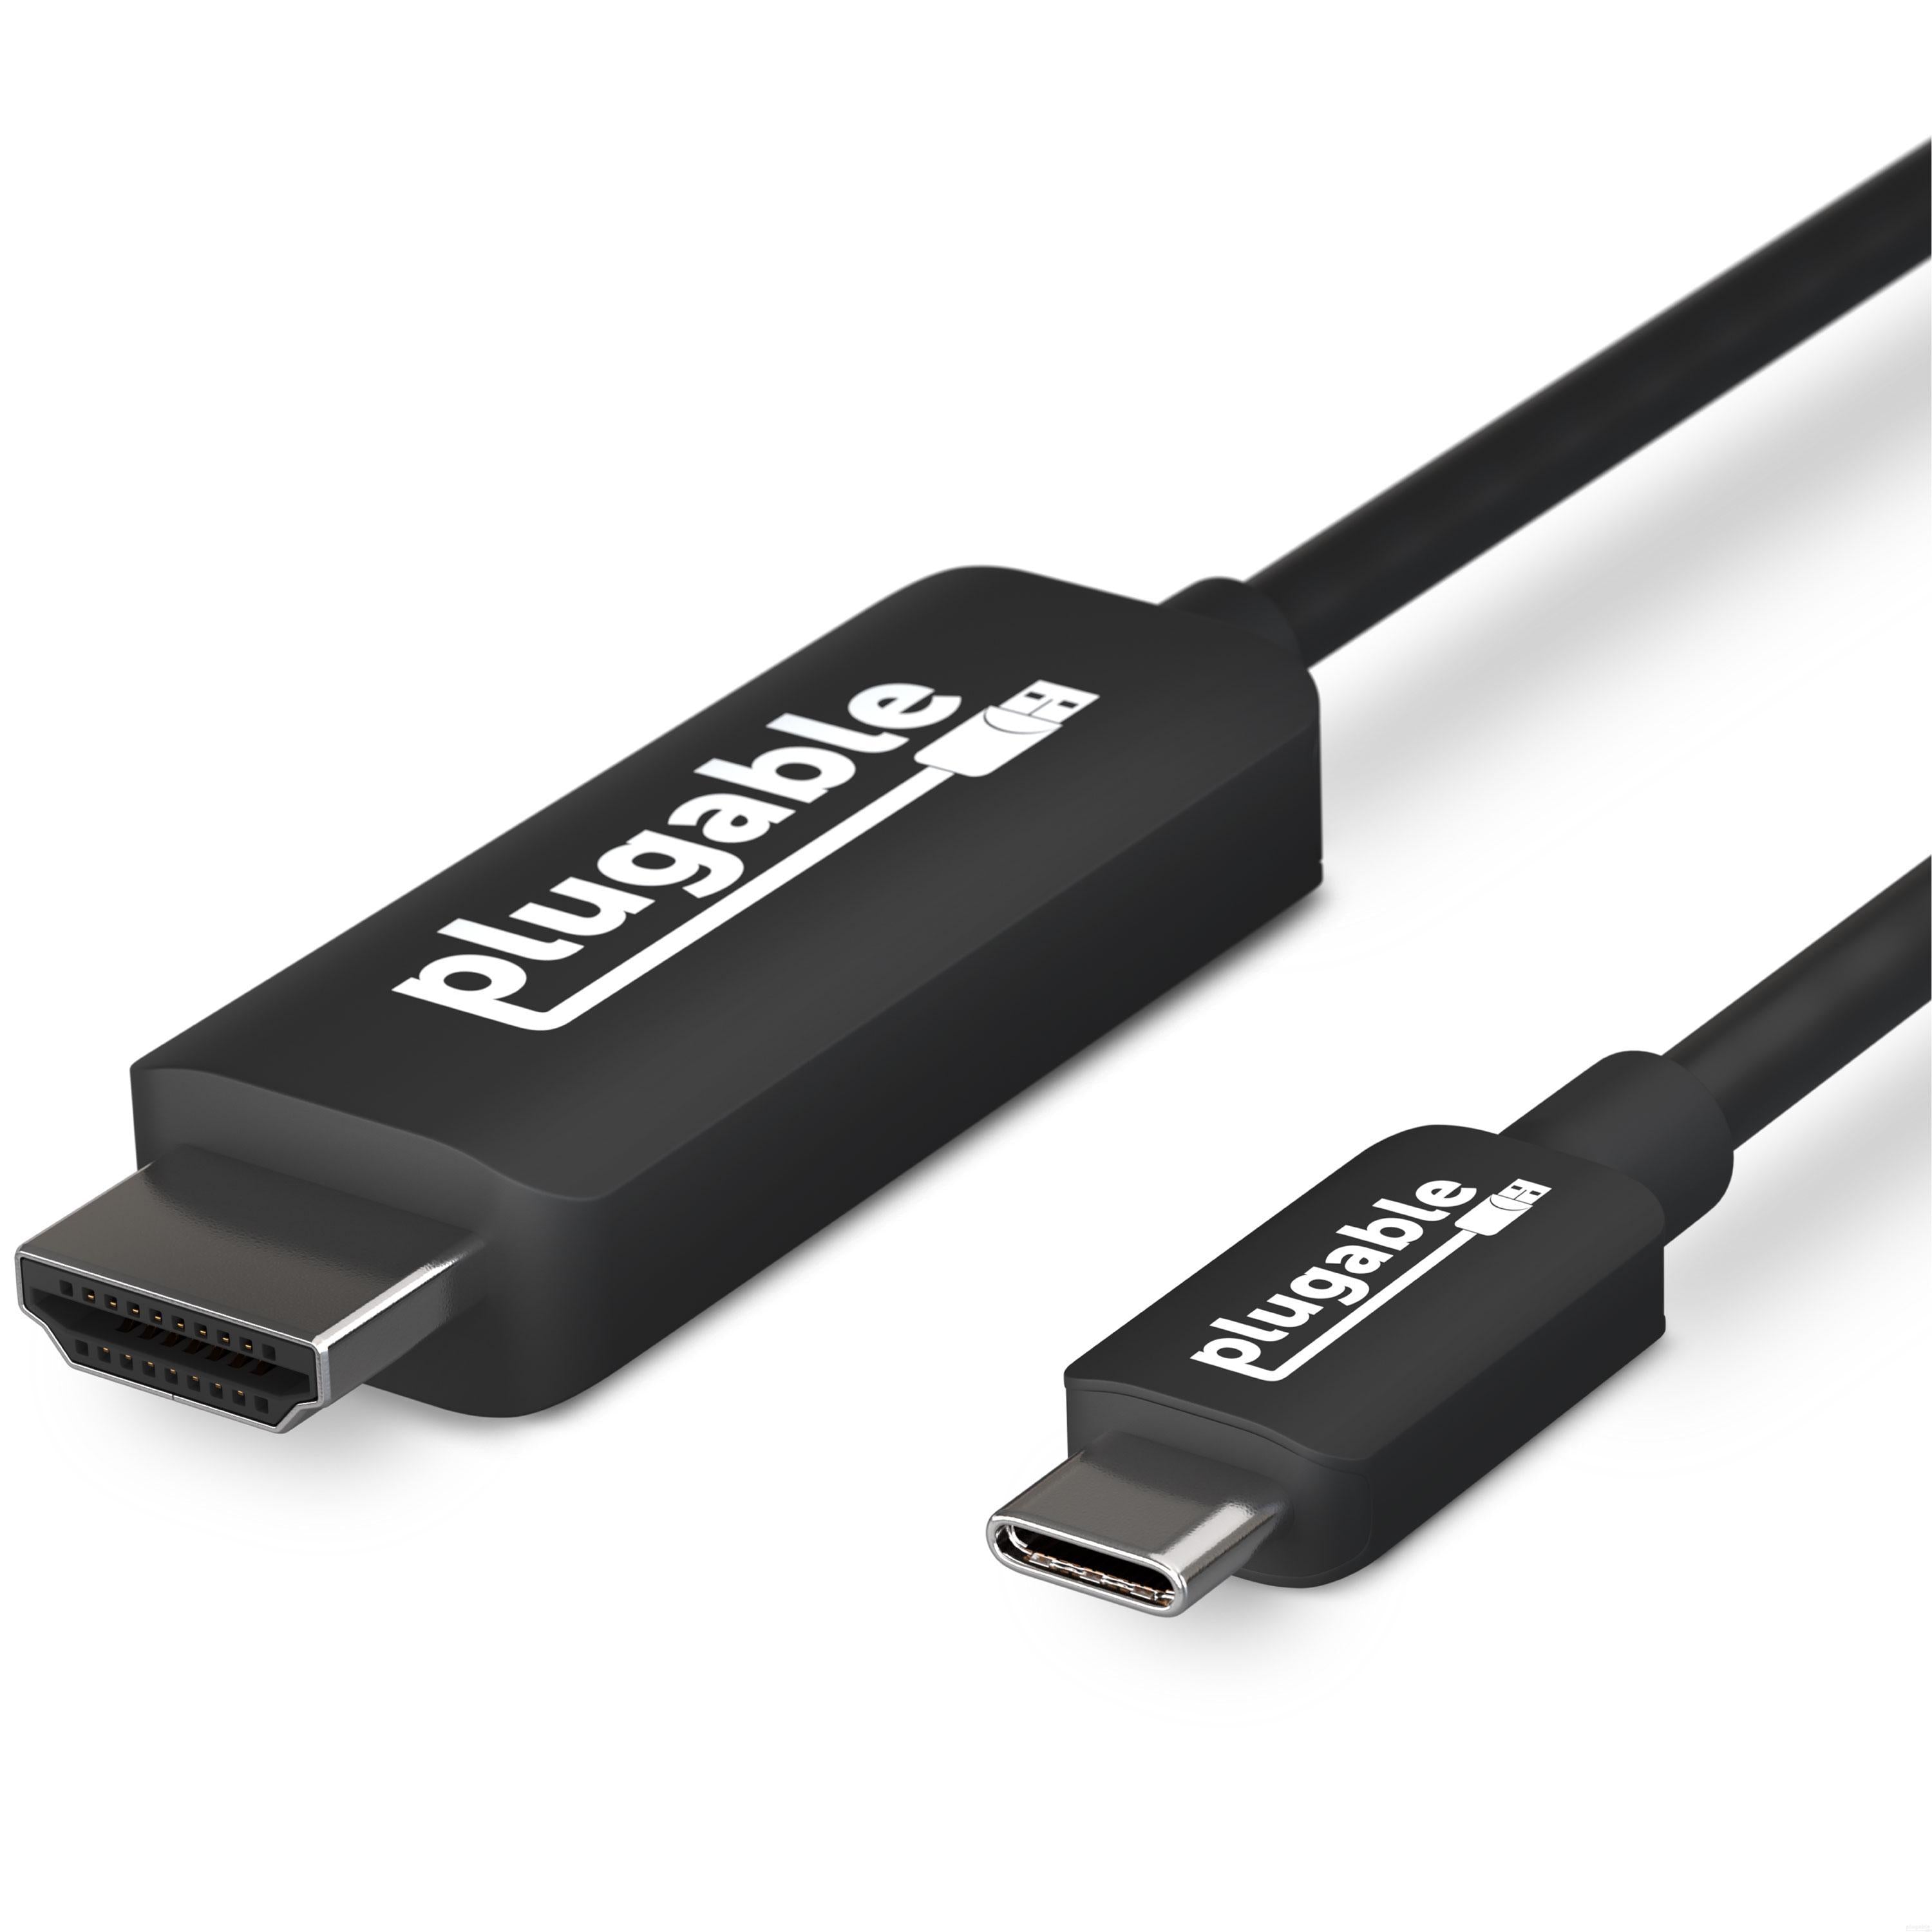 Plugable USB 3.1 Type-C to HDMI Cable – Technologies